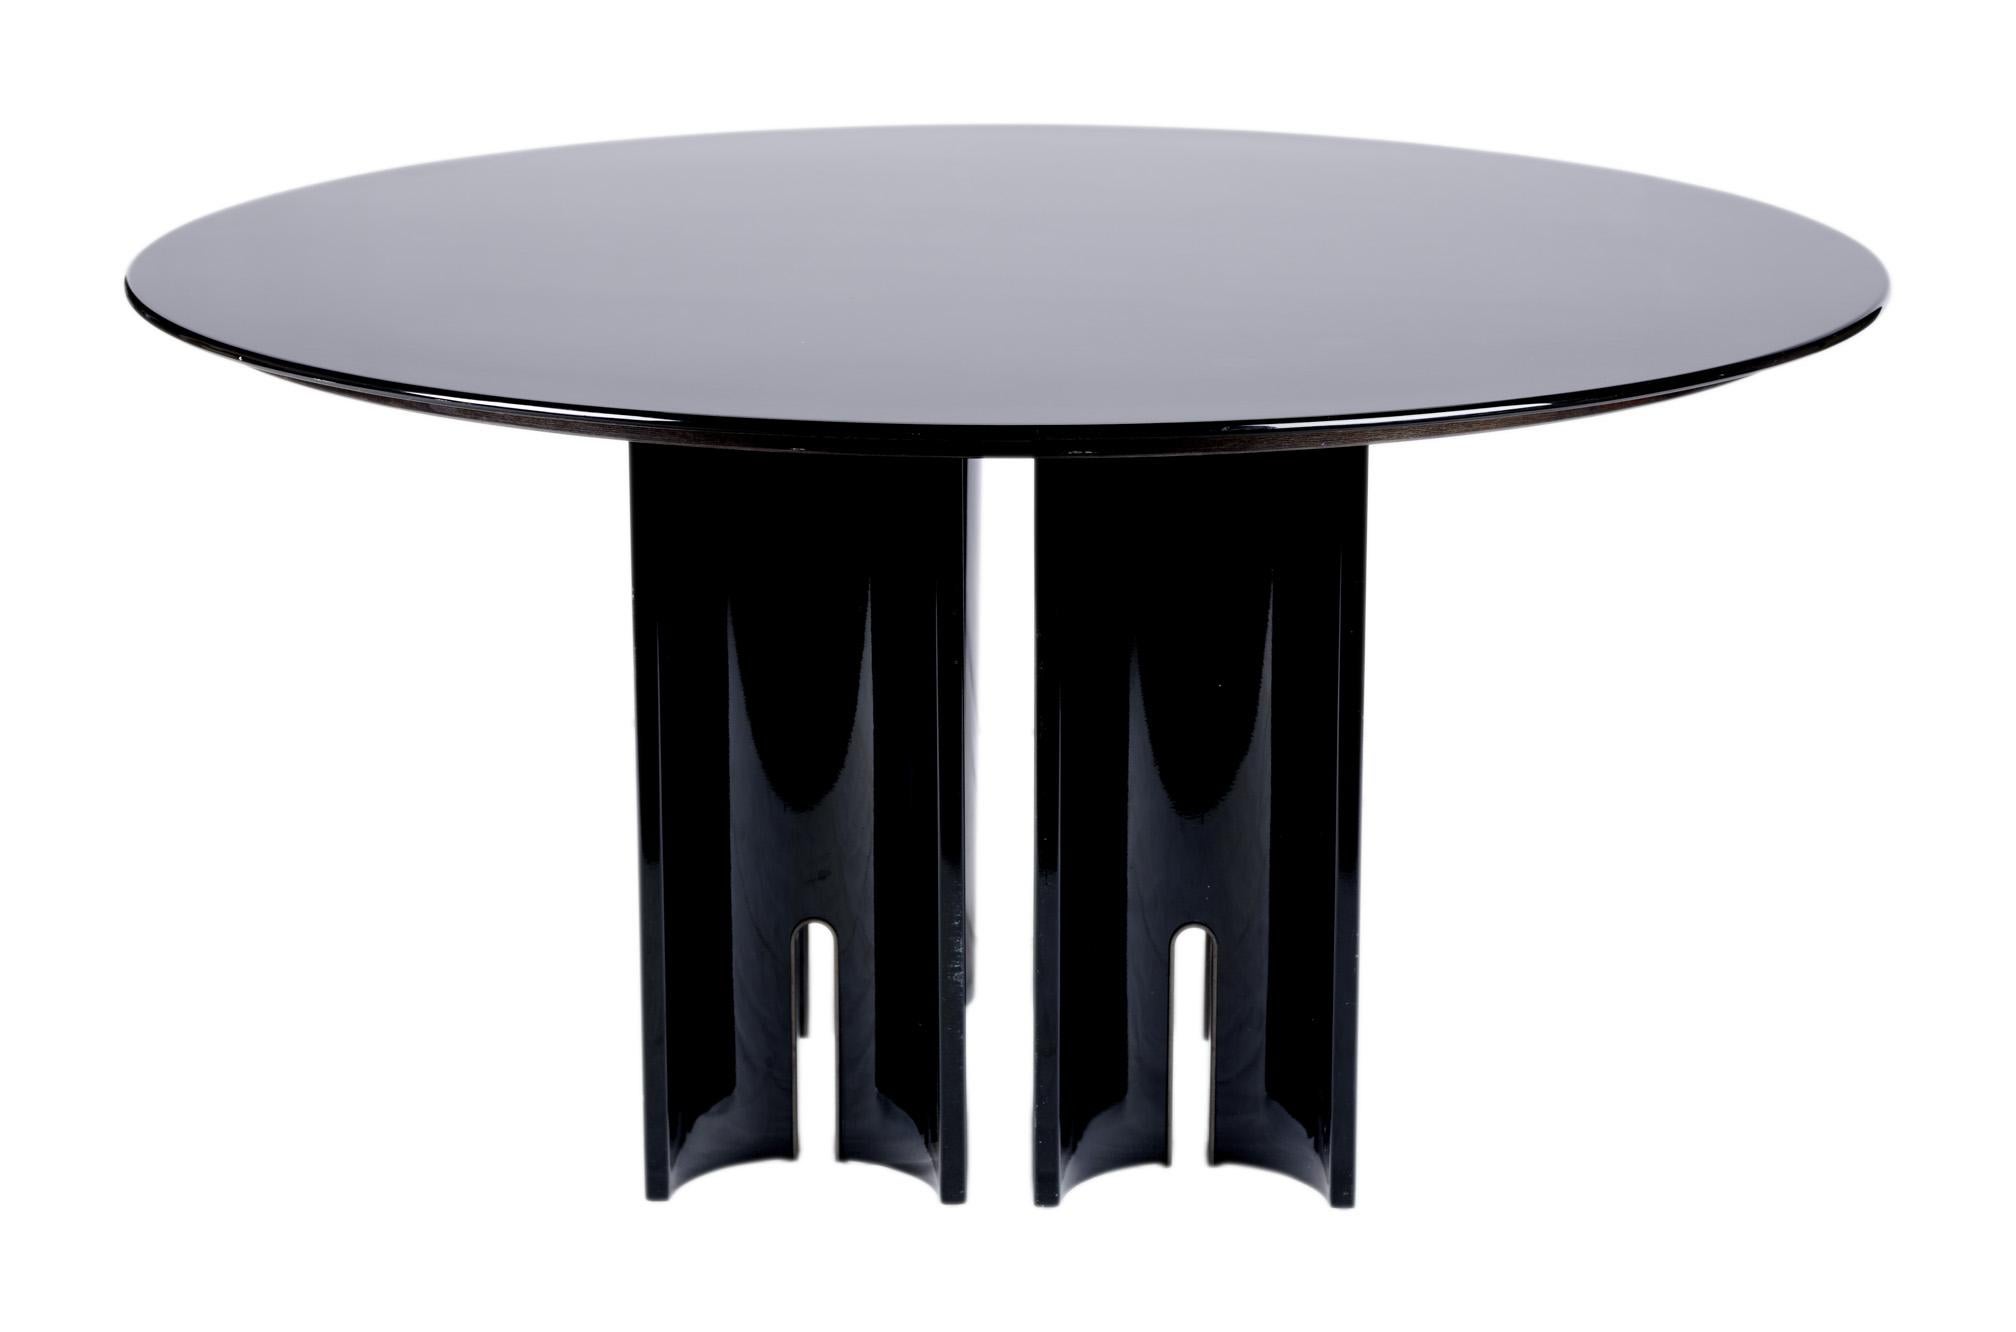 Black lacquered wood table by Giovanni Offredi published by Saporiti. Circa 1980.
Black glossy lacquered wood structure. Four legs on which rests a large round top. Table can be completely dismantled.